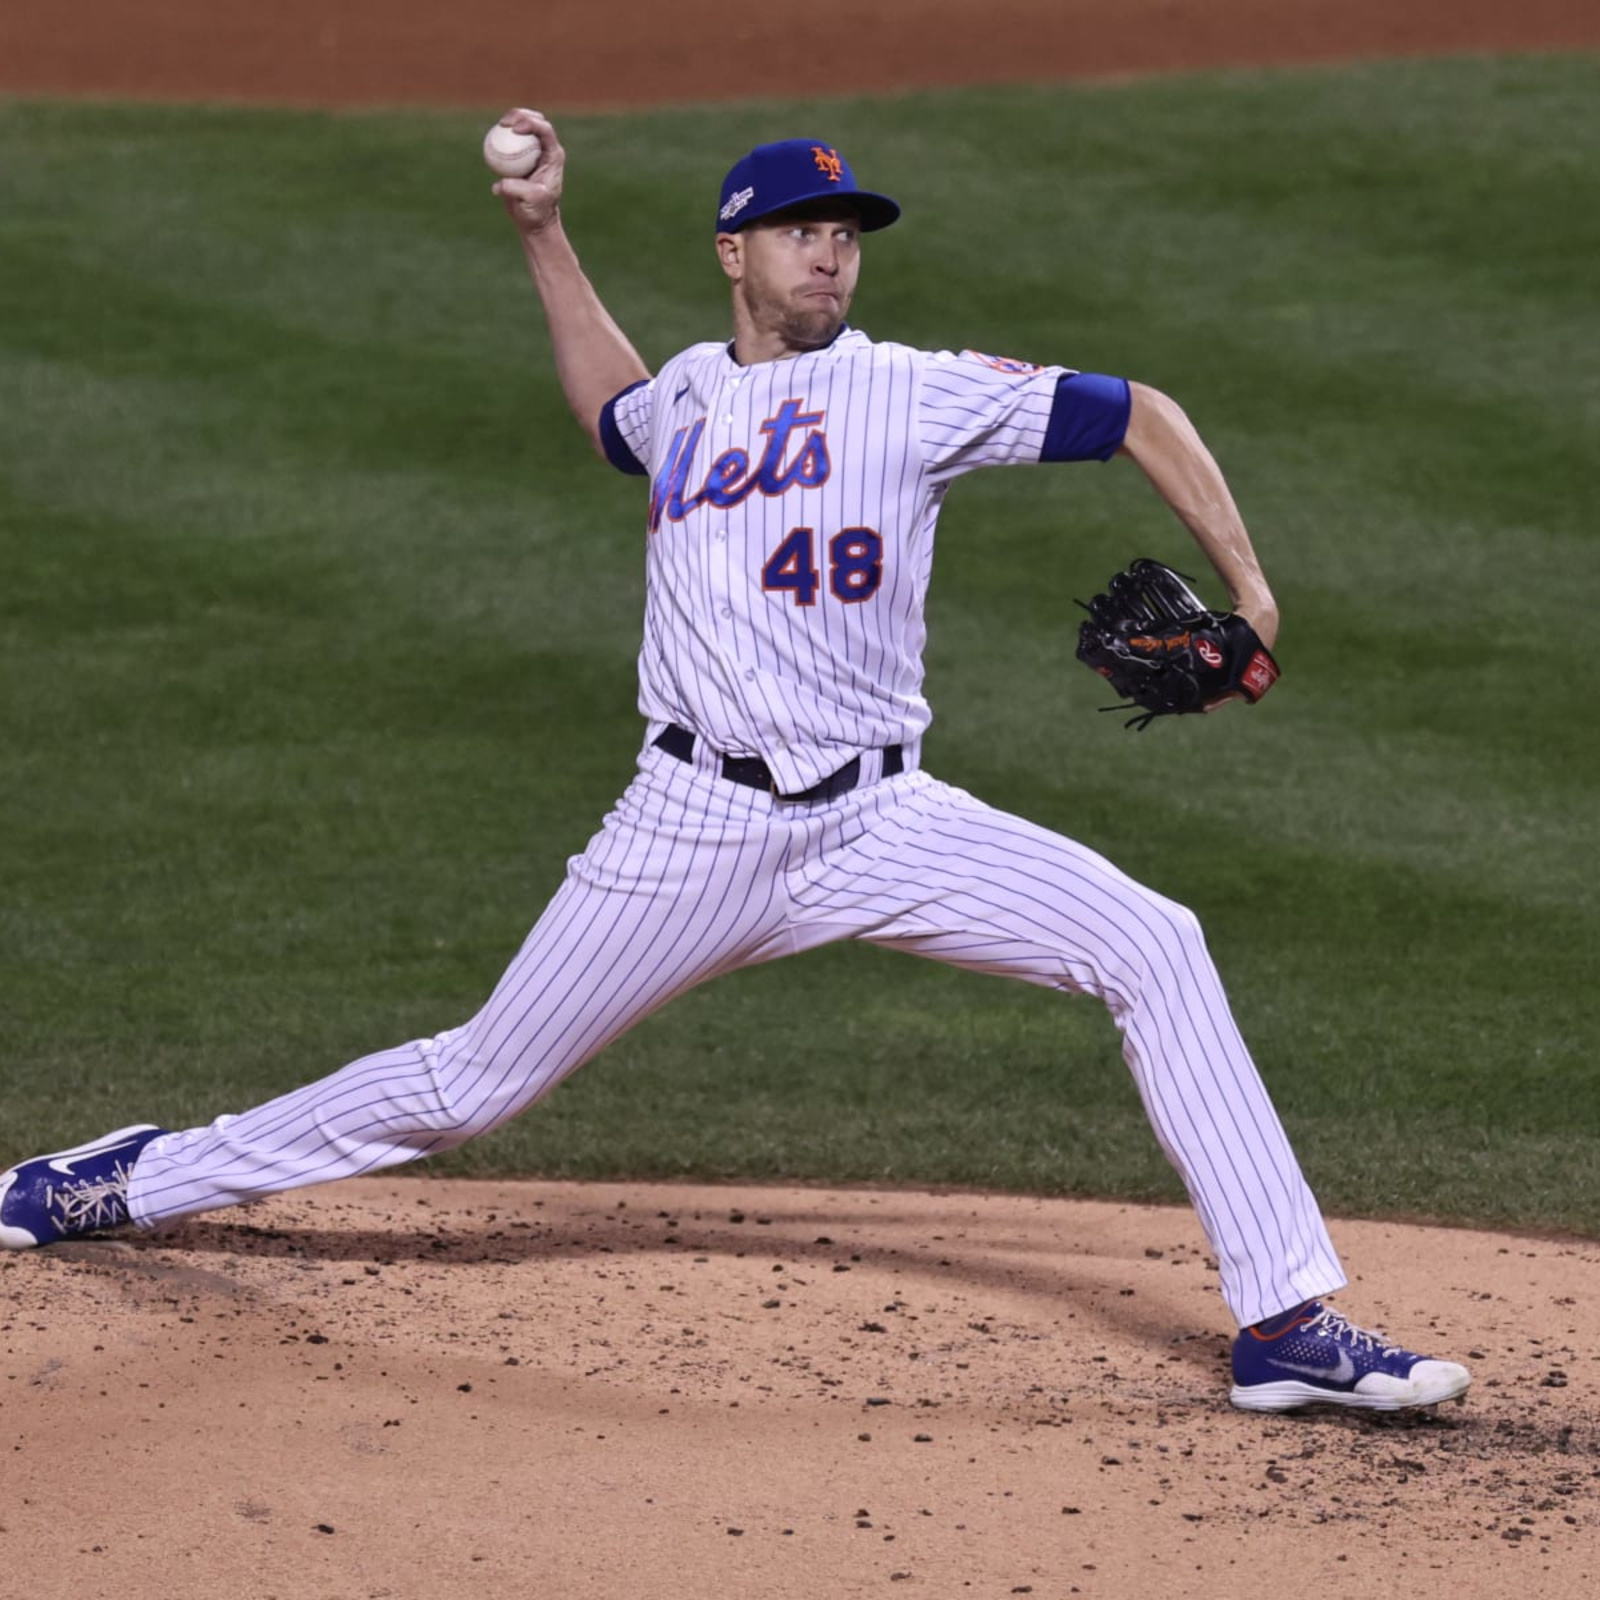 Jacob deGrom signs contract with Rangers, spurns NY Mets